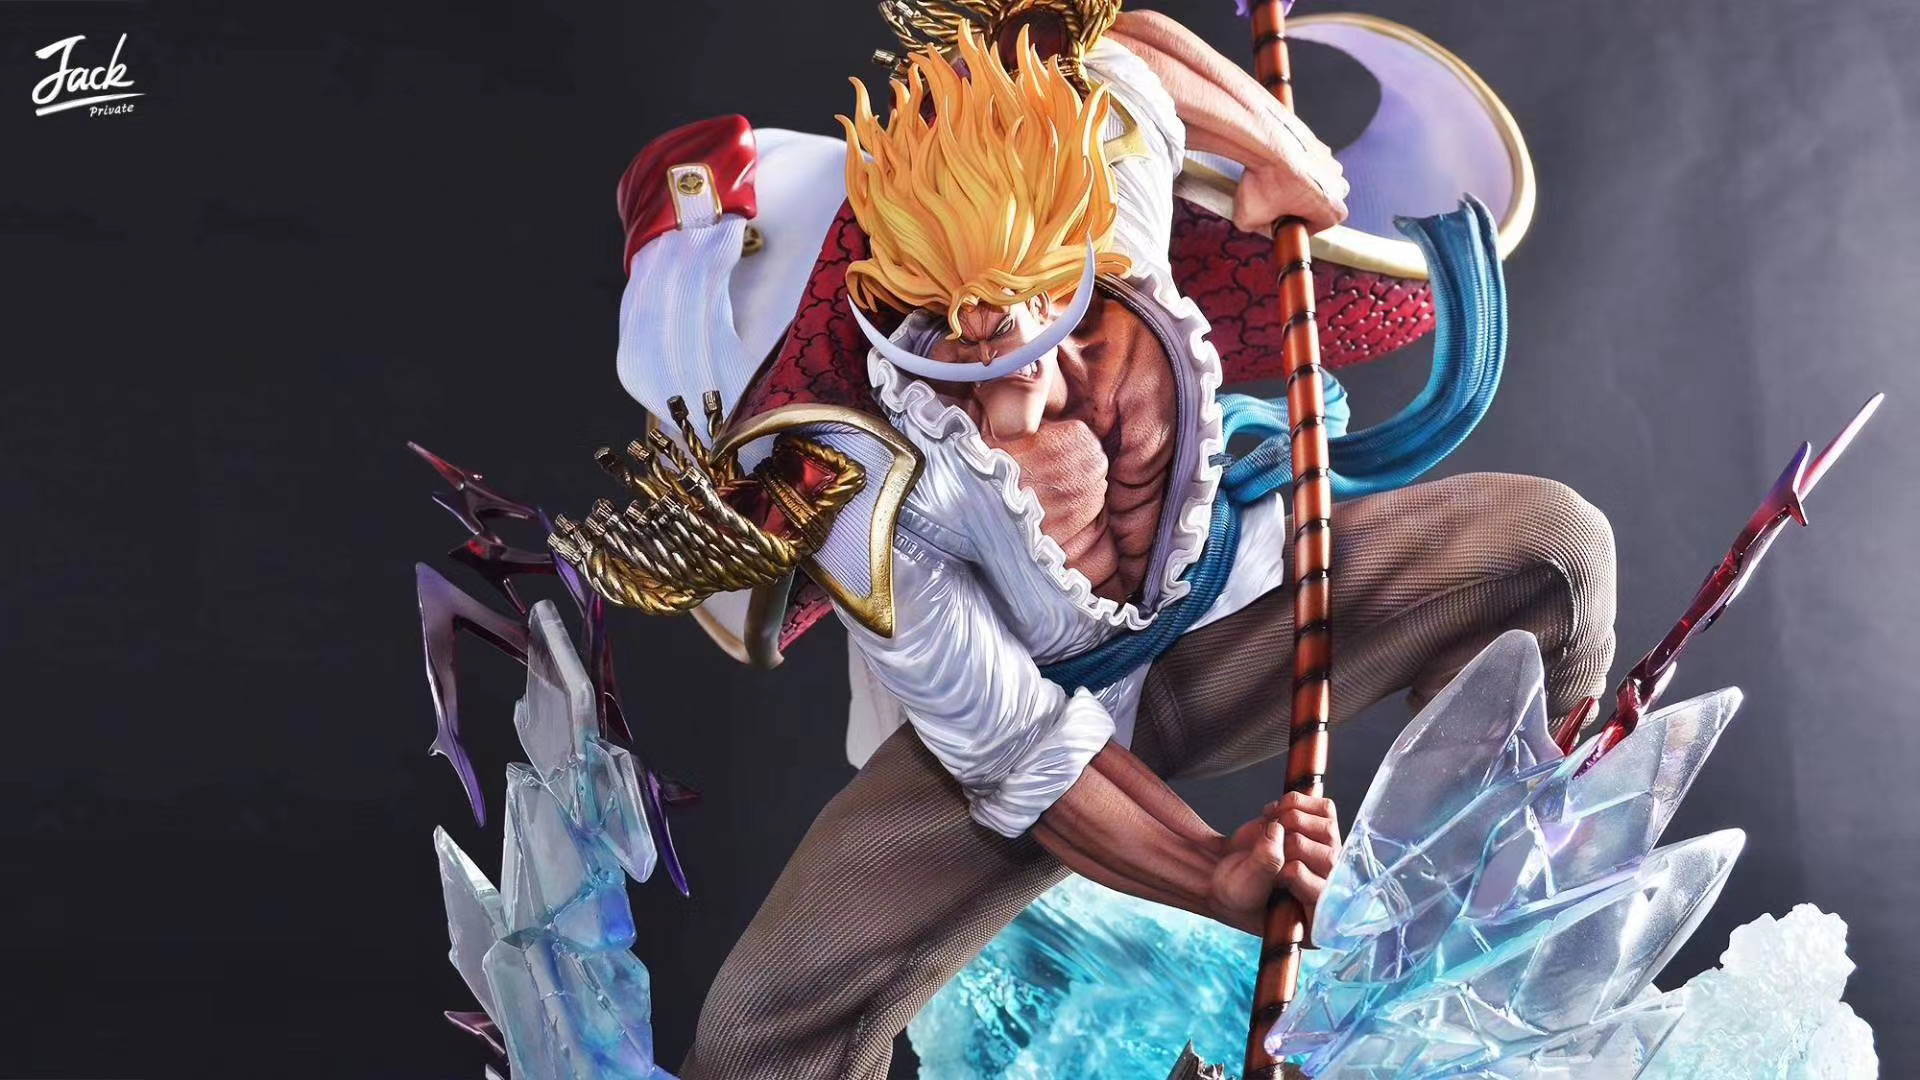 Upcoming Whitebeard One Piece Statue by Jack Private Studio.